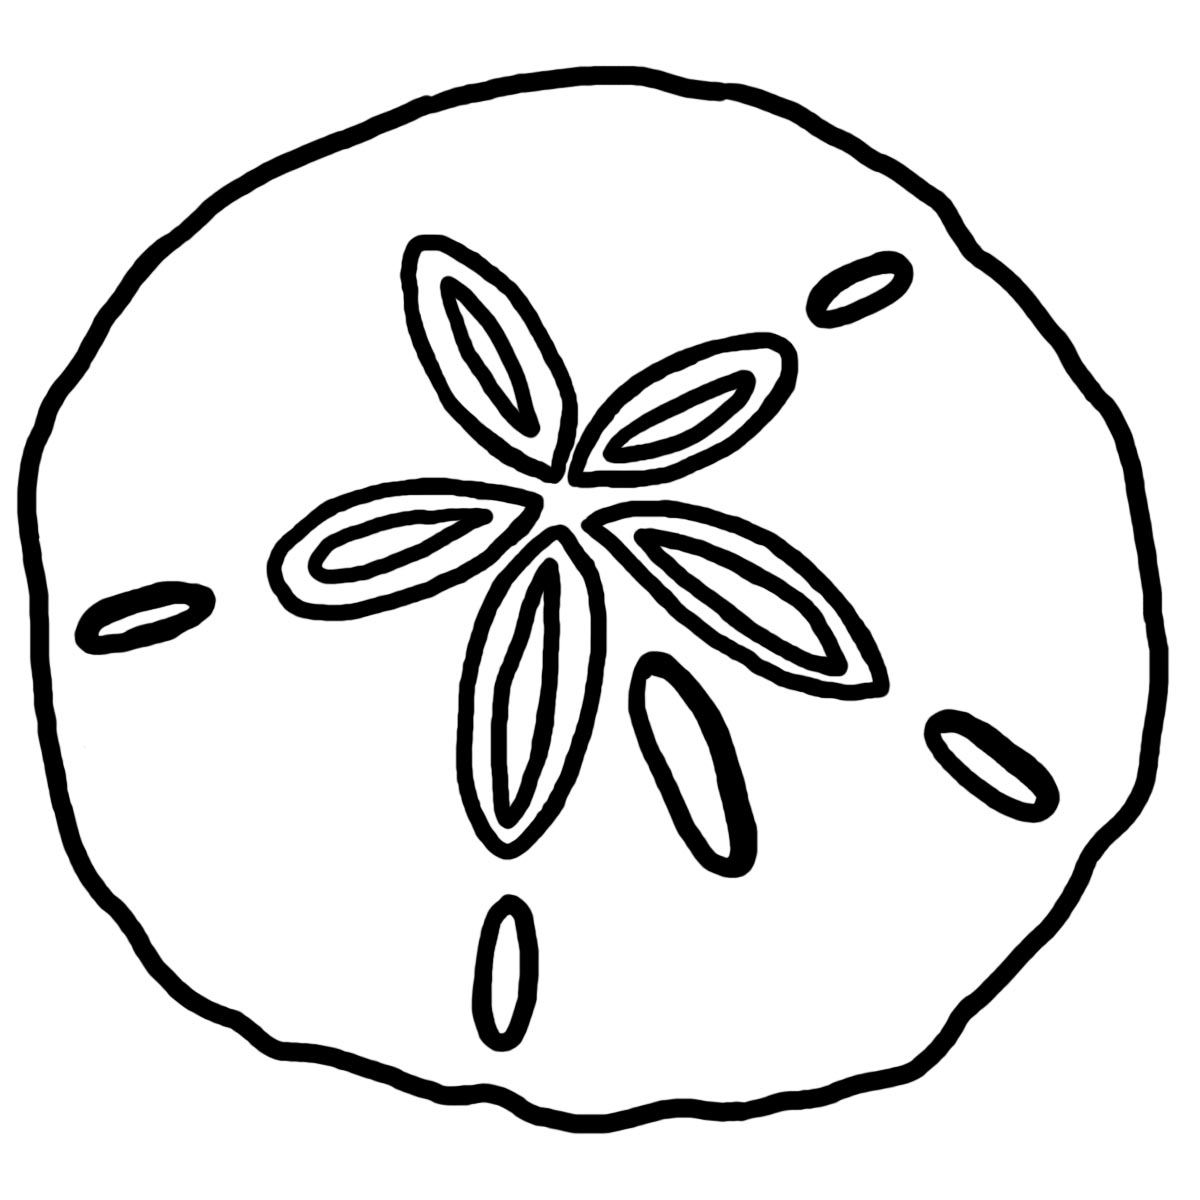 Sand dollar clipart black and white free